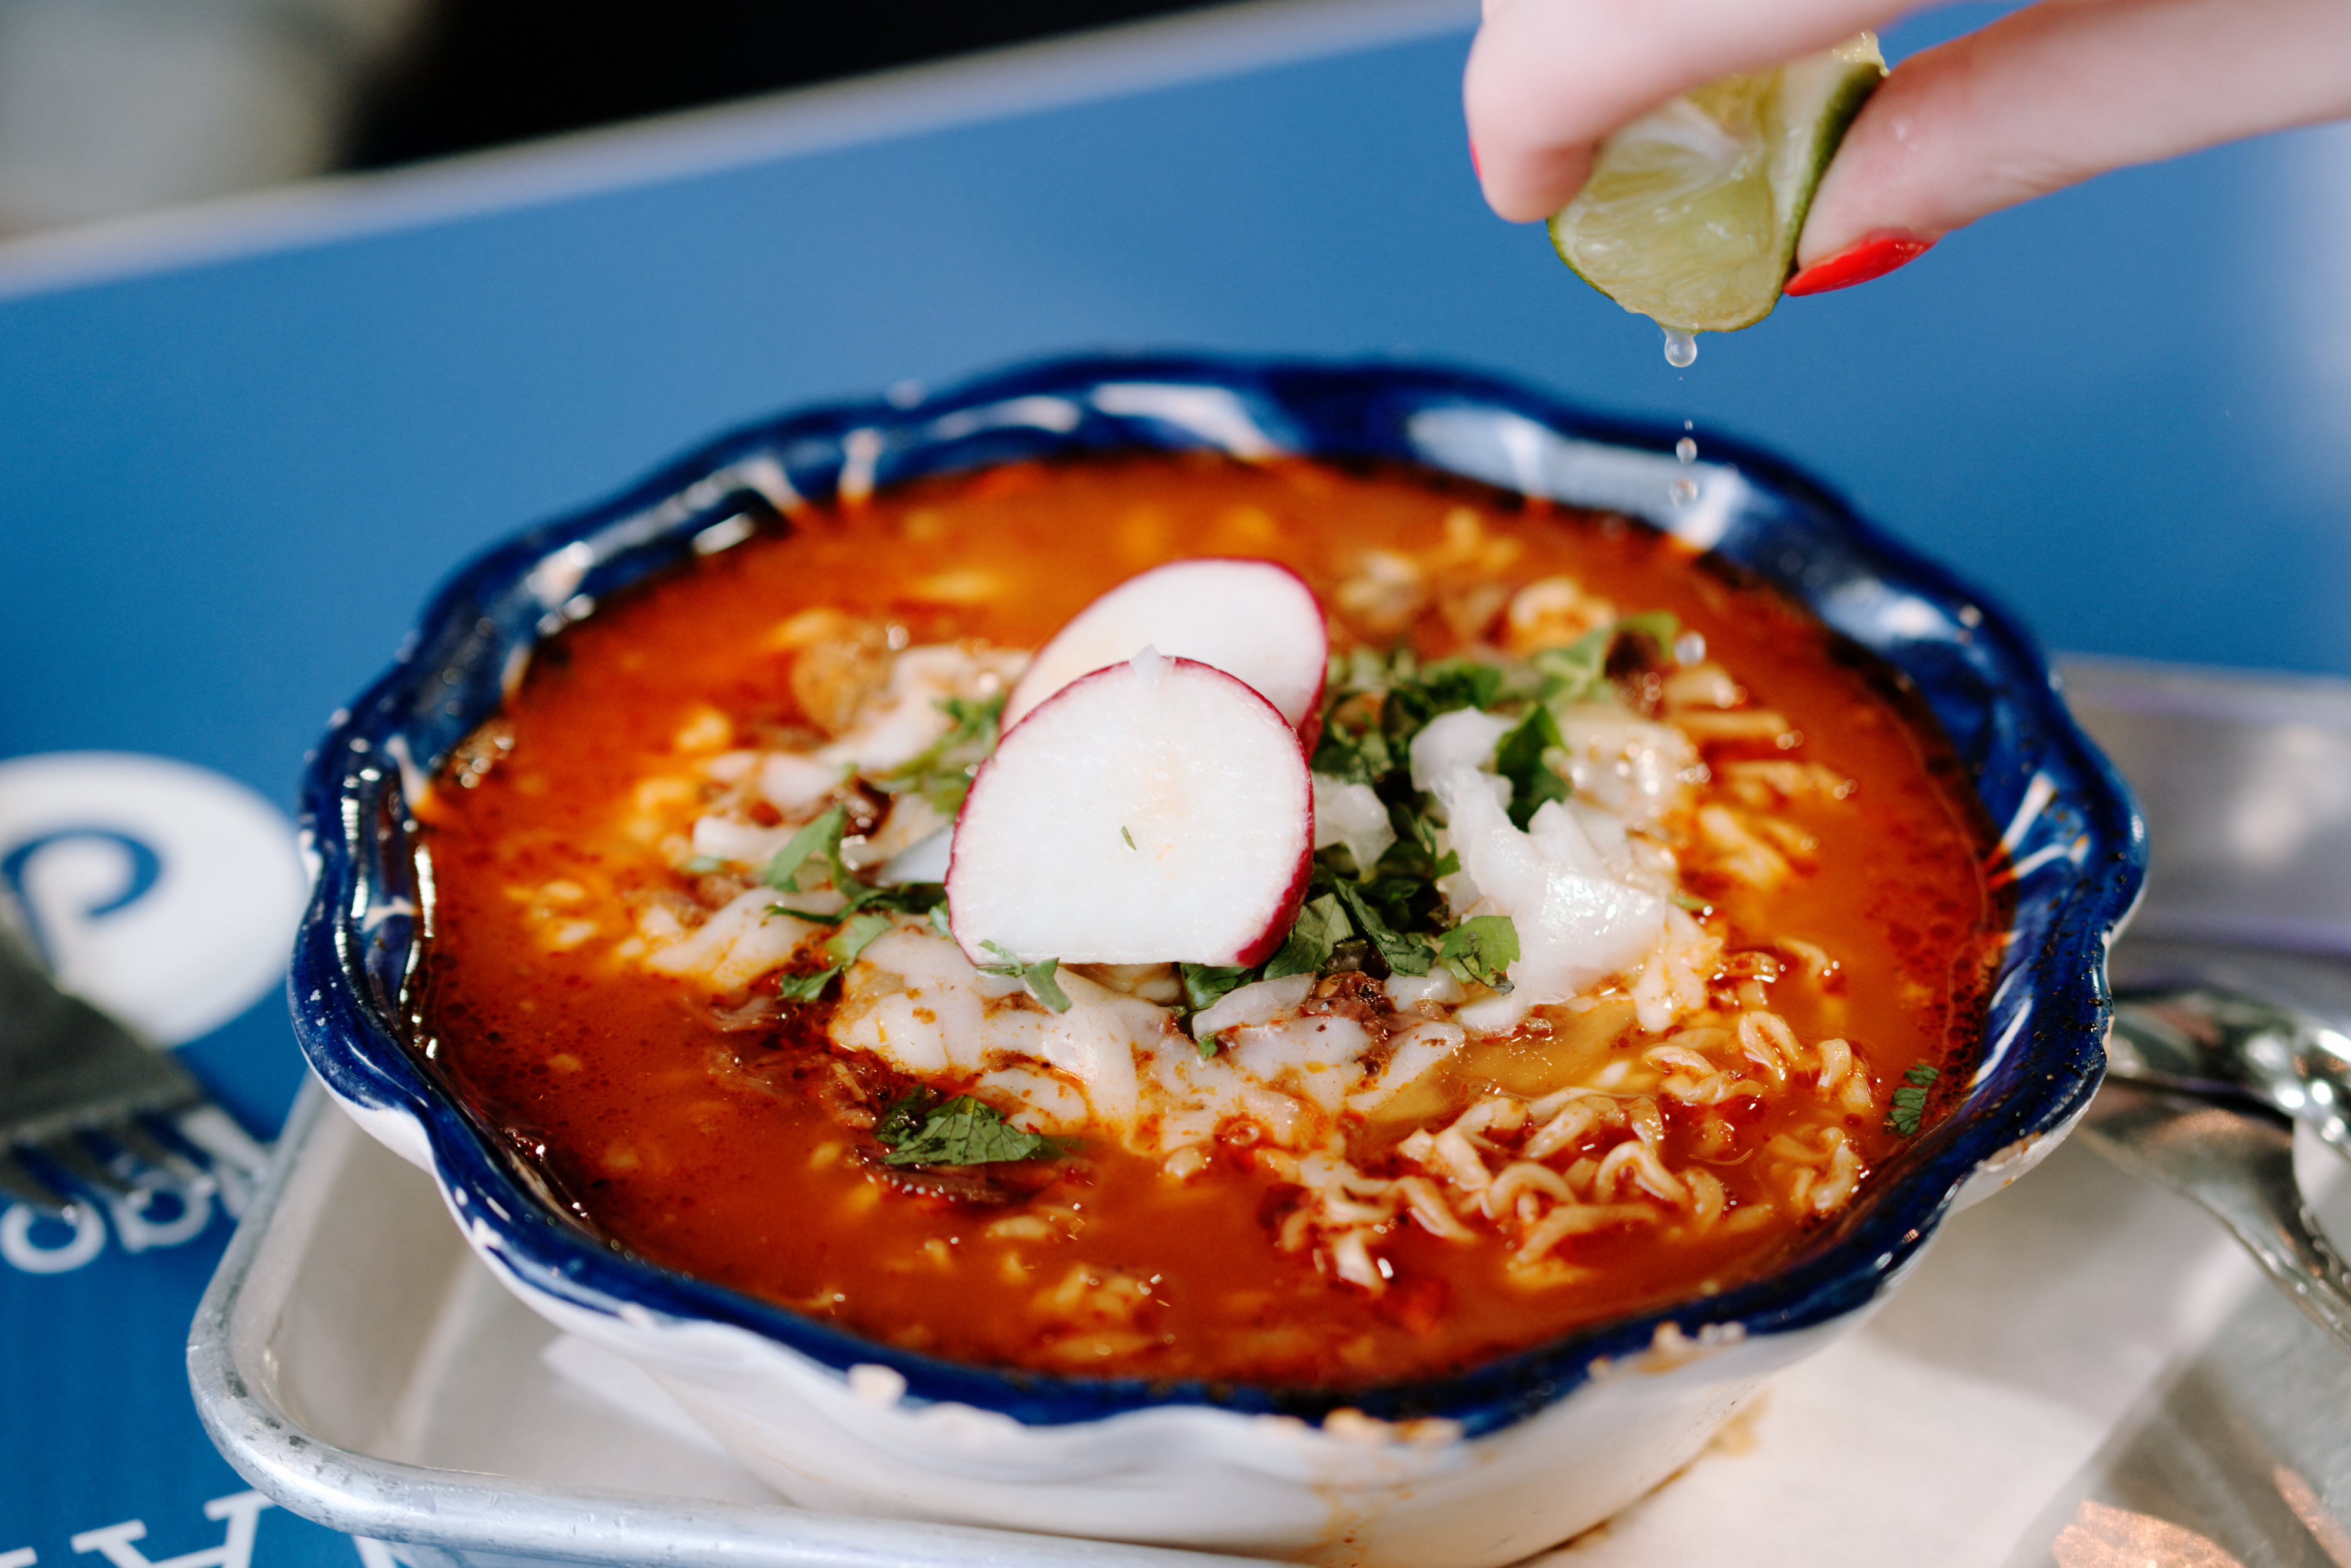 A hand squeezes lime juice onto a bowl of birria ramen.